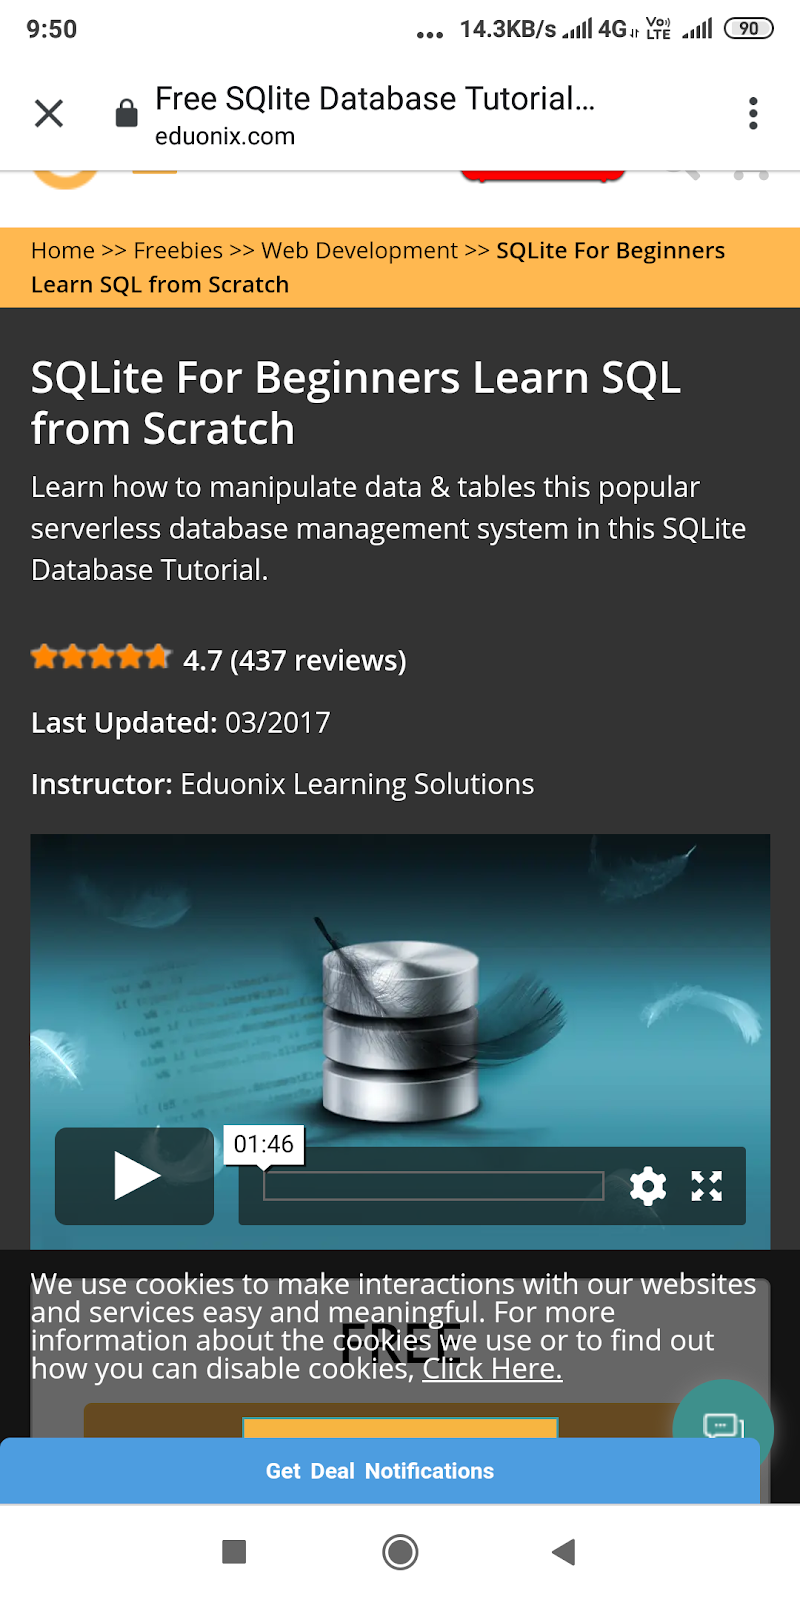 SQlite For BEGINNERS LEARN SQL FROM SCRATCH VIDEO DOWNLOAD PAID TUTORIAL